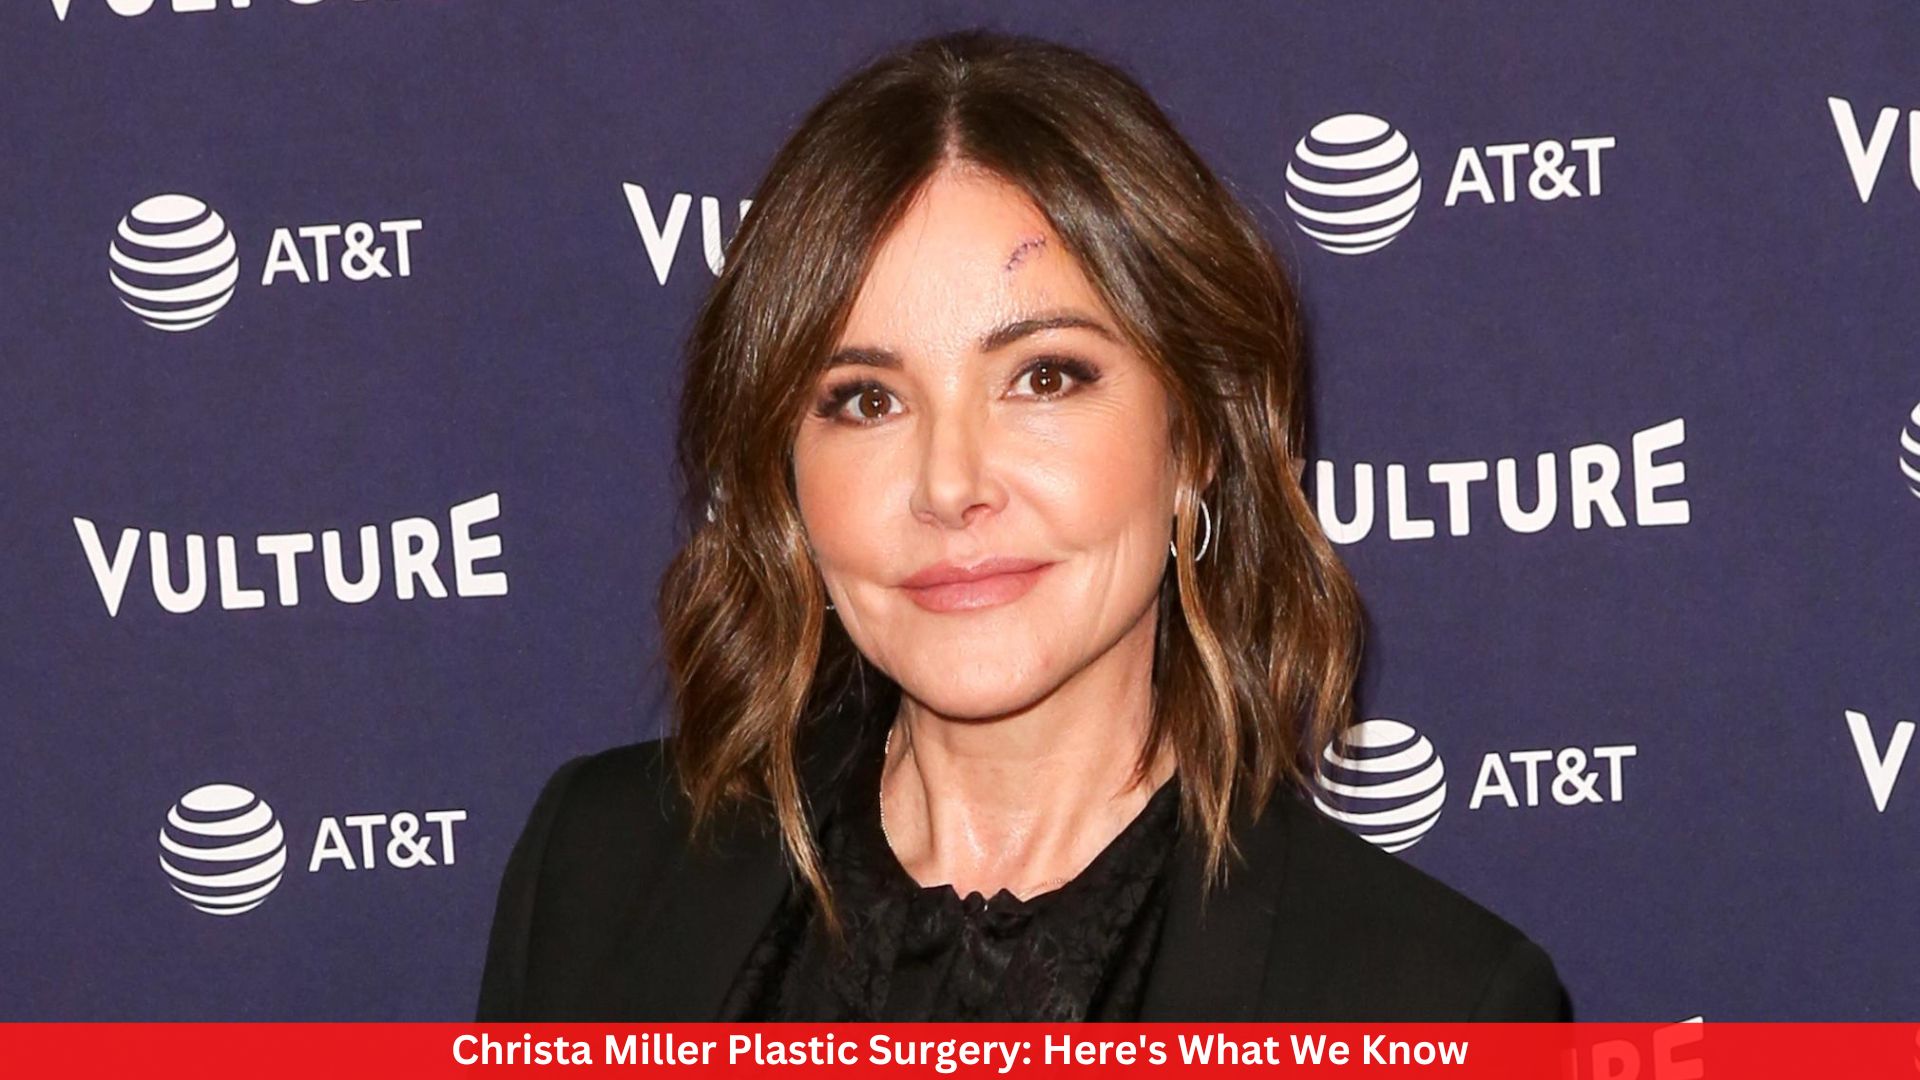 Christa Miller Plastic Surgery: Here's What We Know